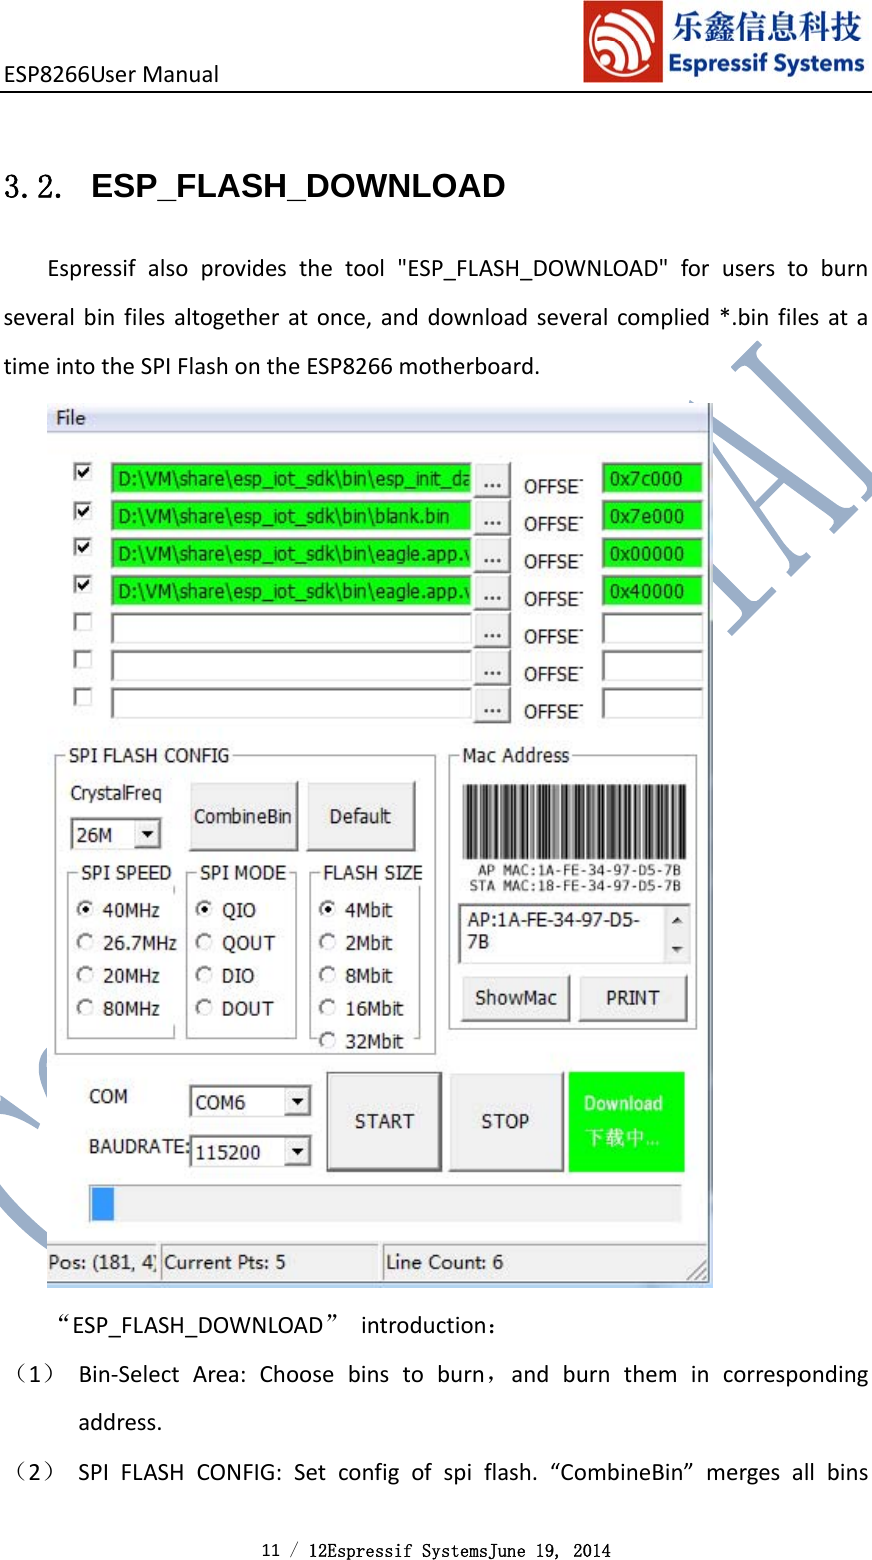 ESP8266UserManual 11 / 12Espressif SystemsJune 19, 2014 3.2. ESP_FLASH_DOWNLOAD Espressifalsoprovidesthetool&quot;ESP_FLASH_DOWNLOAD&quot;foruserstoburnseveralbinfilesaltogetheratonce,anddownloadseveralcomplied*.binfilesatatimeintotheSPIFlashontheESP8266motherboard.“ESP_FLASH_DOWNLOAD”introduction：（1） Bin‐SelectArea:Choosebinstoburn，andburnthemincorrespondingaddress.（2） SPIFLASHCONFIG:Setconfigofspiflash.“CombineBin”mergesallbins